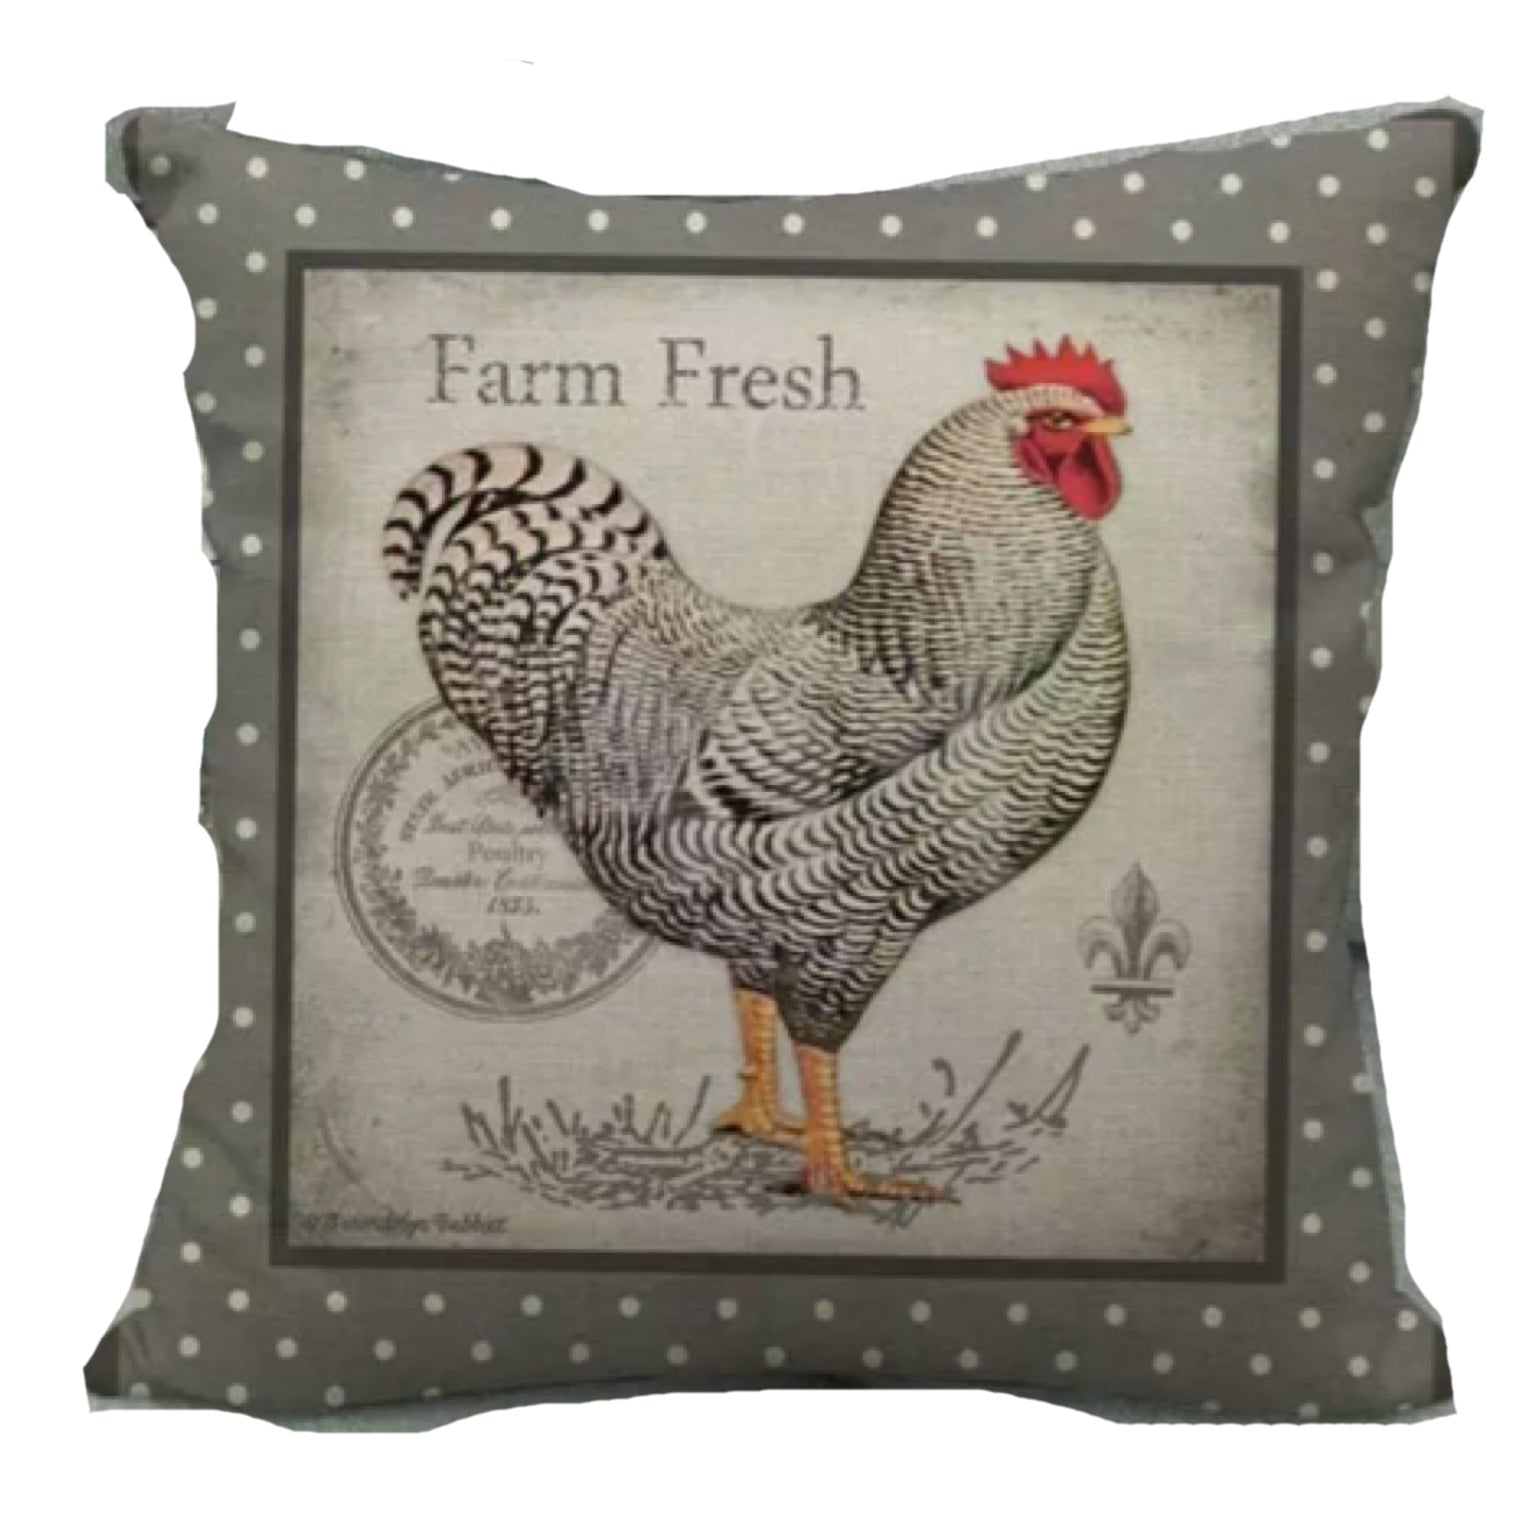 Cushion Cover Rooster Farm Fresh Spots - The Renmy Store Homewares & Gifts 